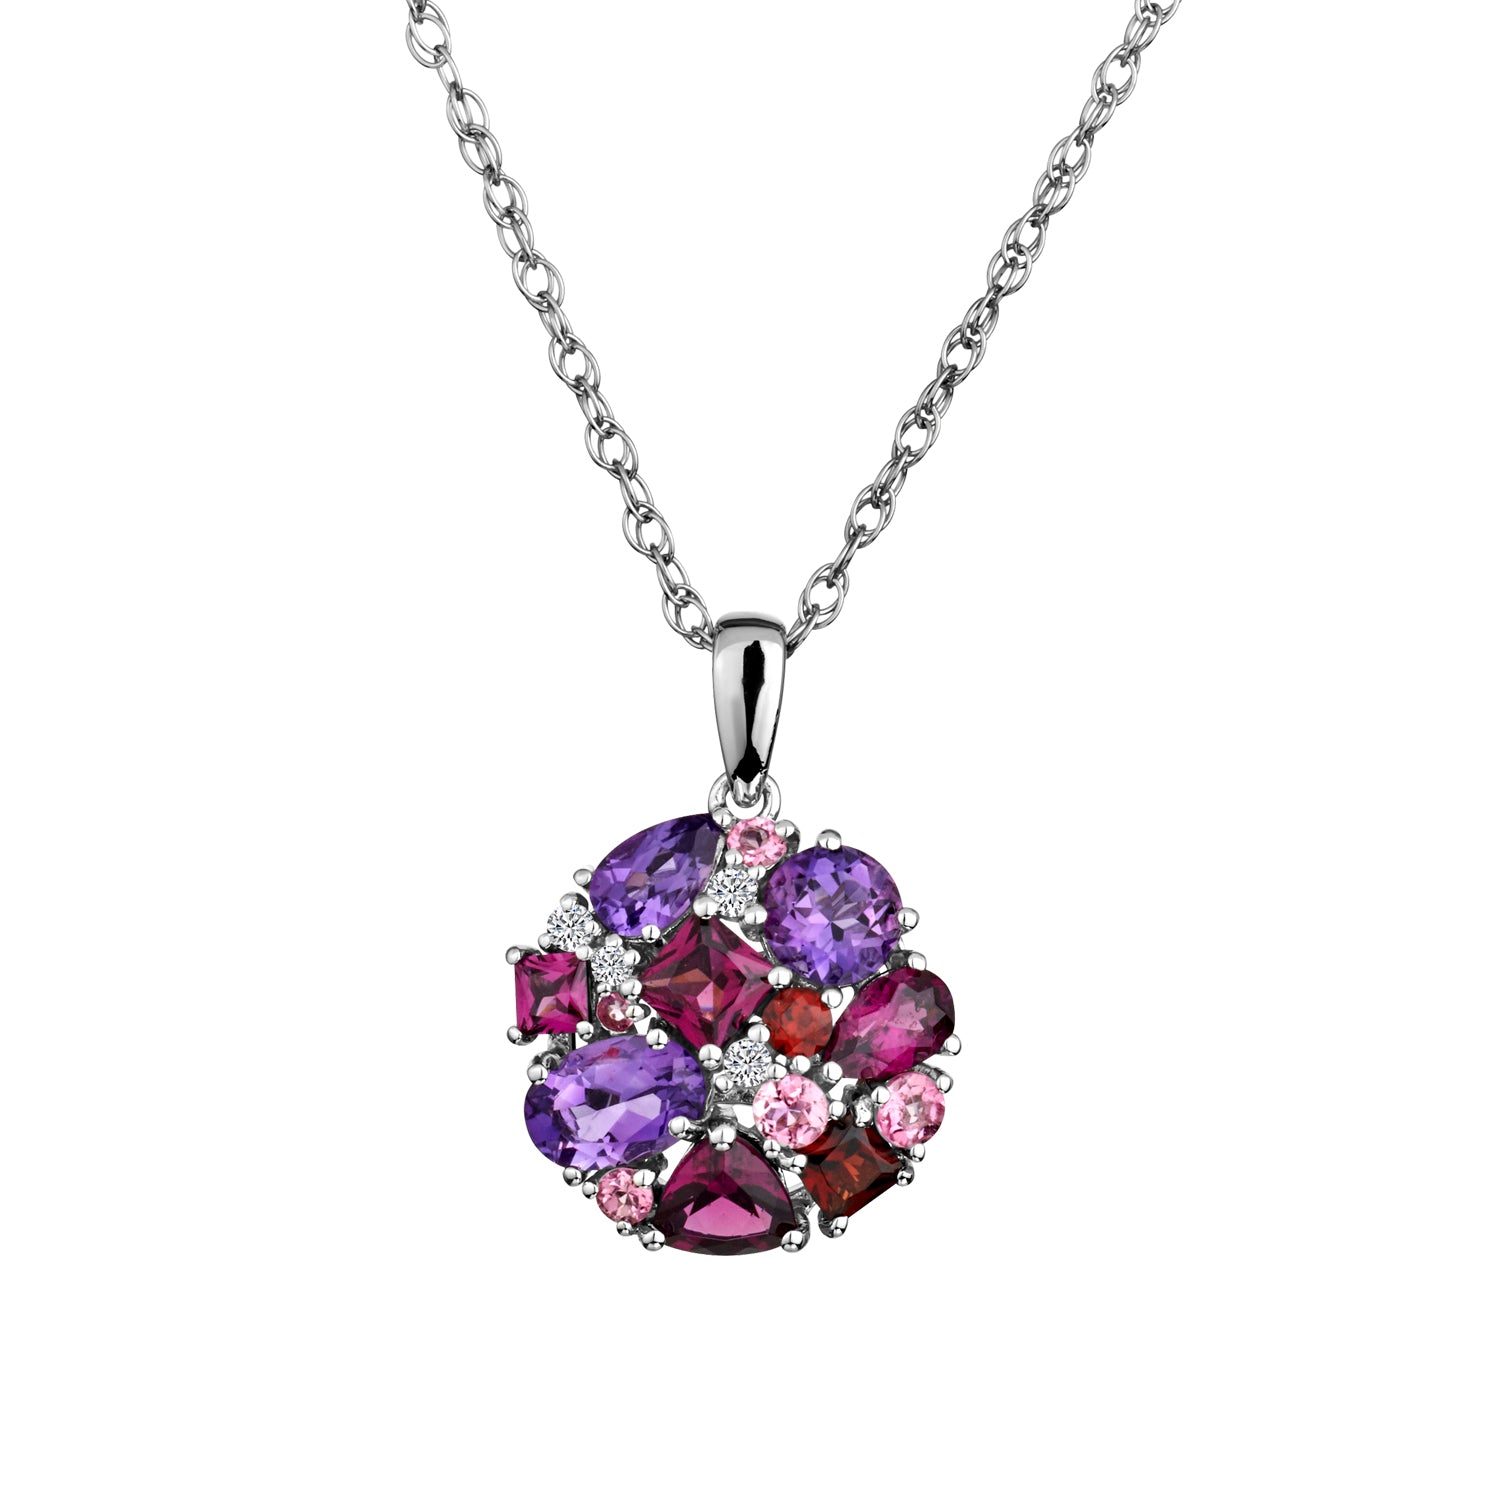 Genuine Garnet, Amethyst, Pink Tourmaline & White Sapphire Pendant,  Sterling Silver. Necklaces and Pendants. Griffin Jewellery Designs. 